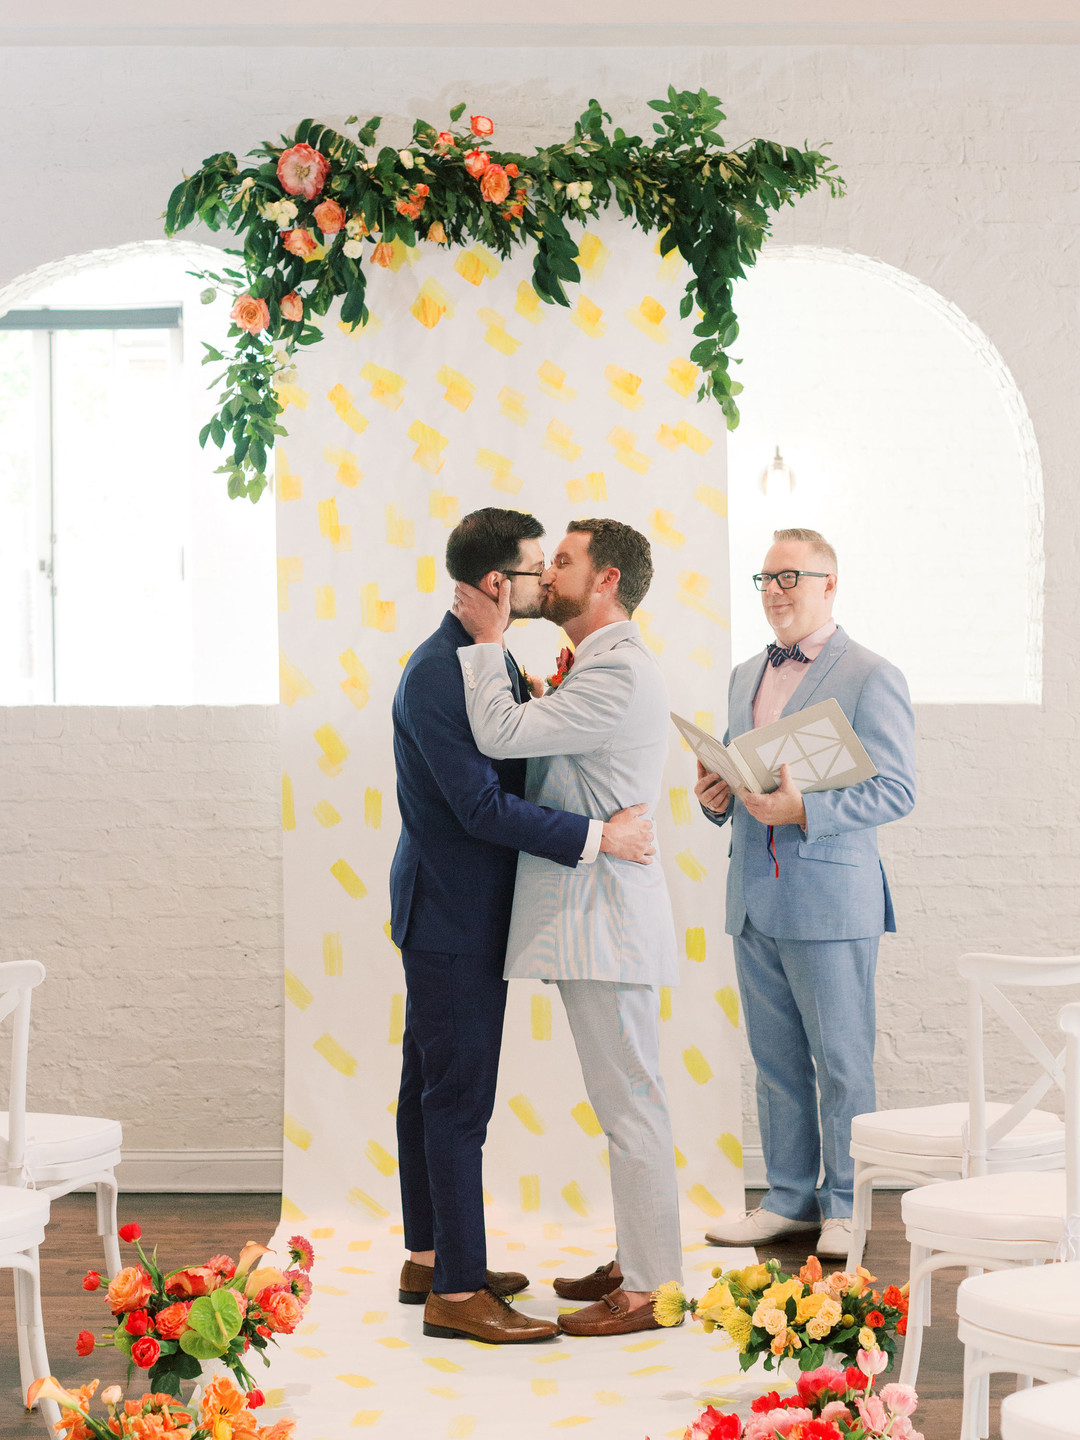 Summer citrus wedding inspiration at historic post office LGBTQ+ weddings two grooms gay wedding blue suit white gray suit orange blue bright colorful summery styled shoot kiss